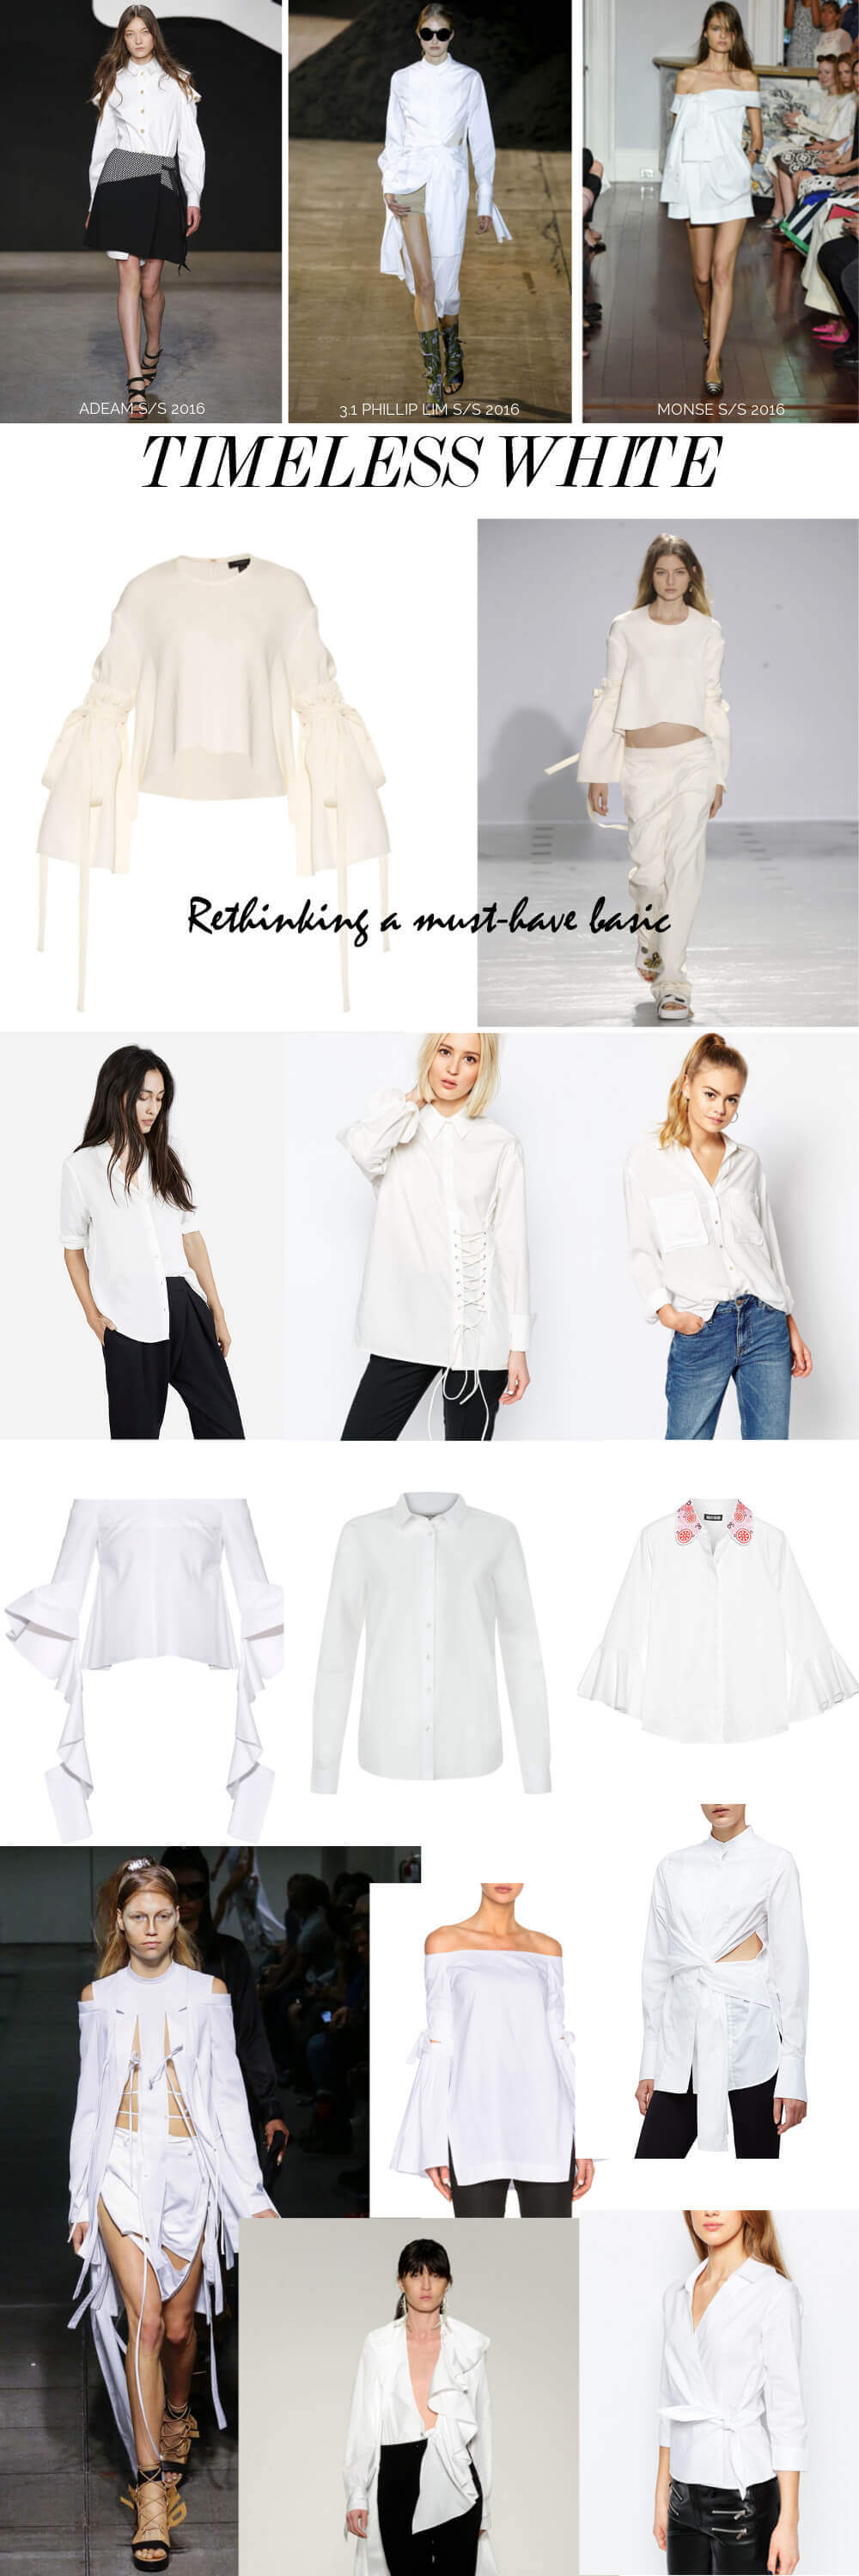 white shirts to inspire | Shop now